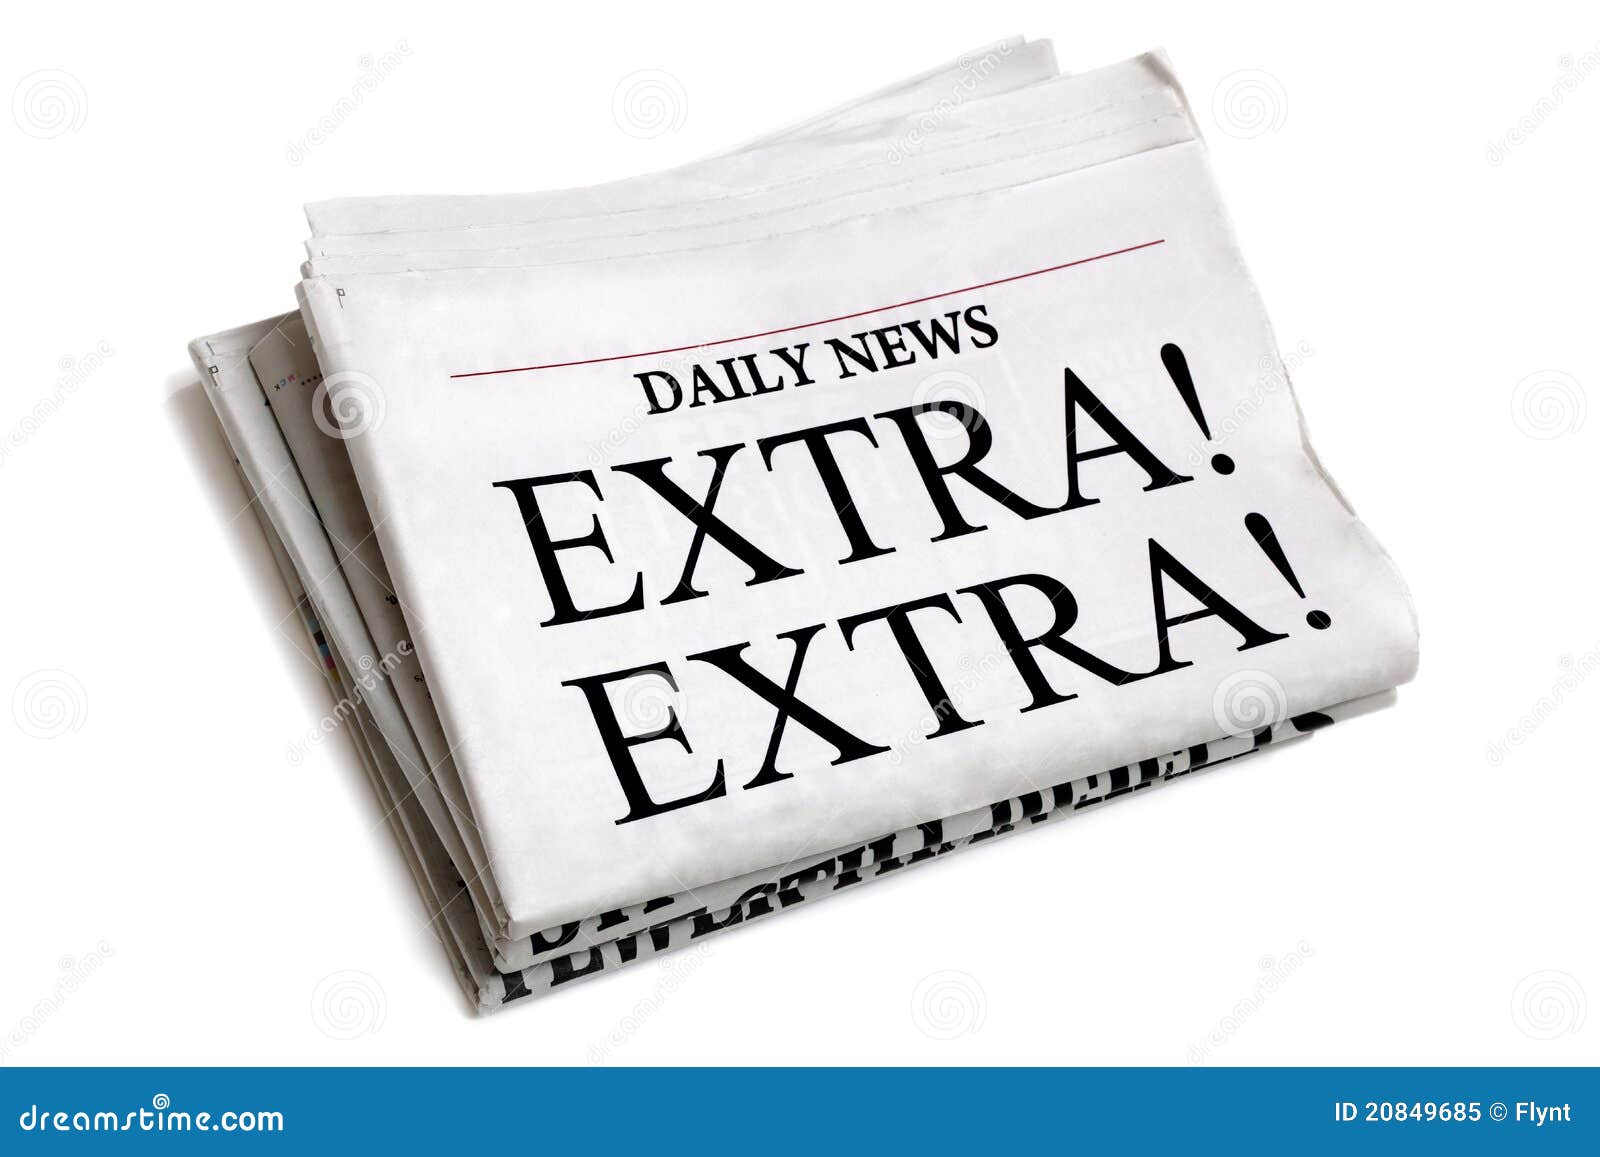 clipart image of newspaper - photo #45